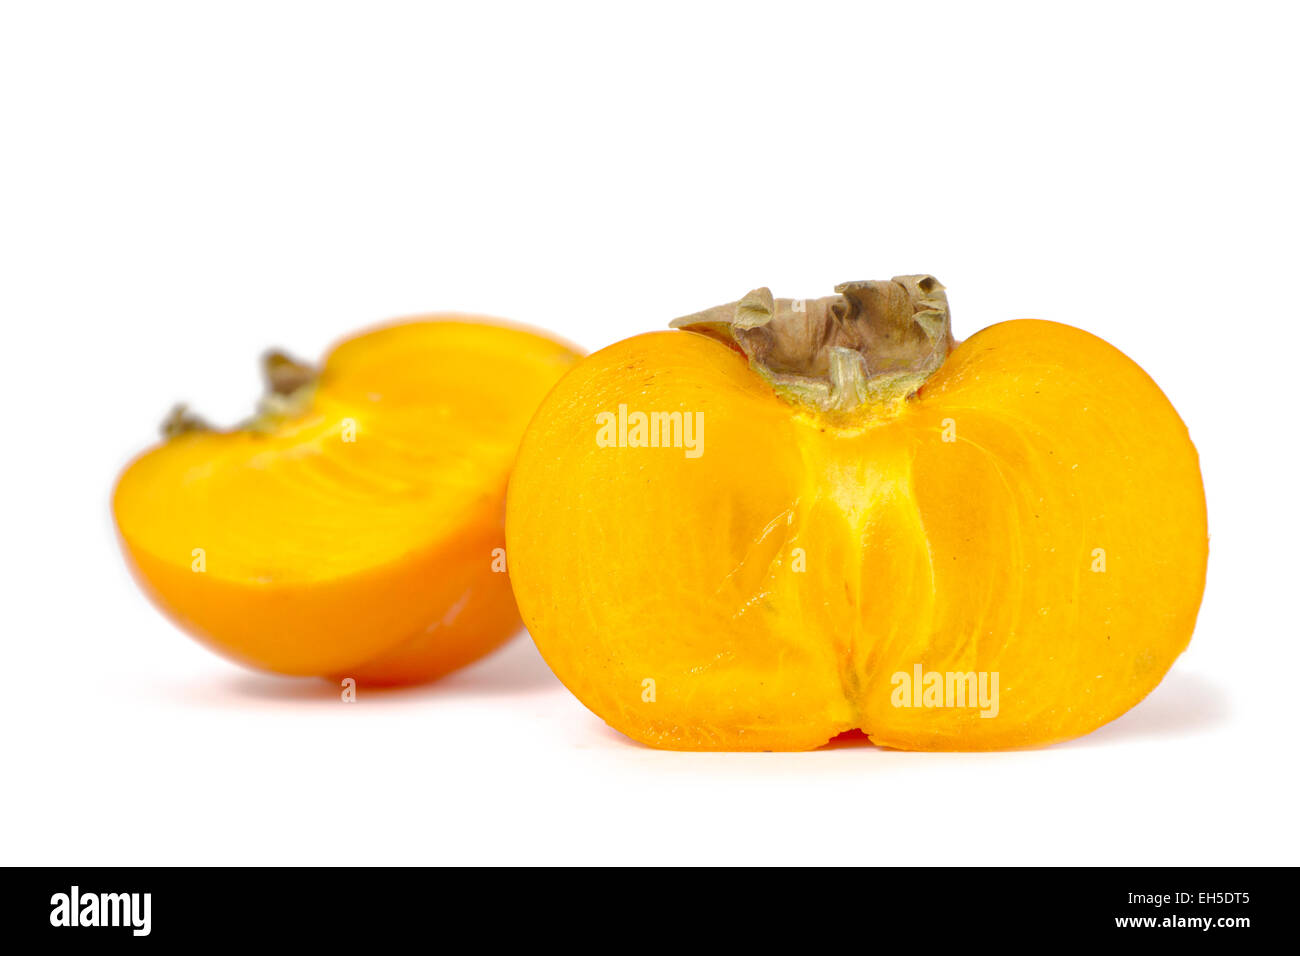 Side view of a sharon / persimmon on white background. Stock Photo